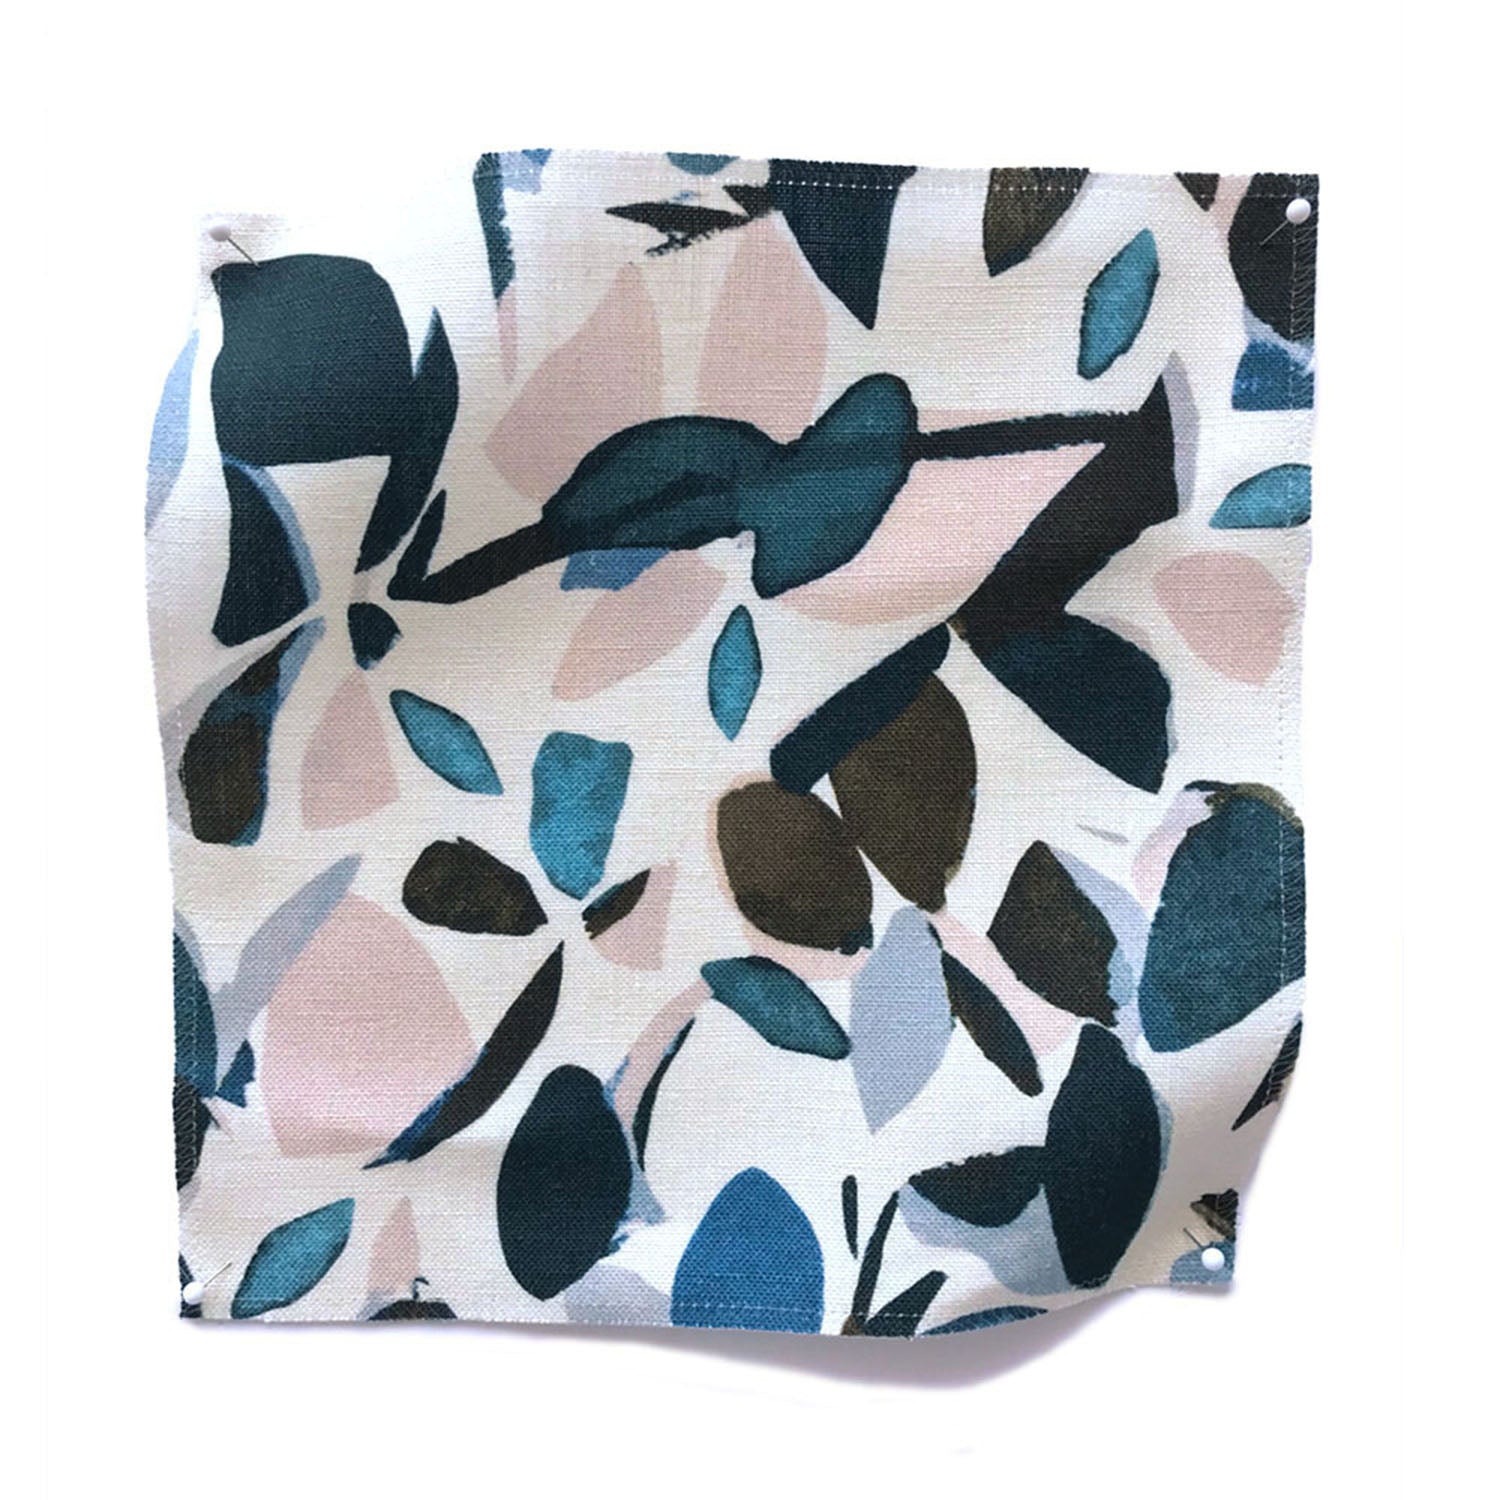 Square fabric swatch in a minimal leaf print in shades of blue, brown and pink on a white field.